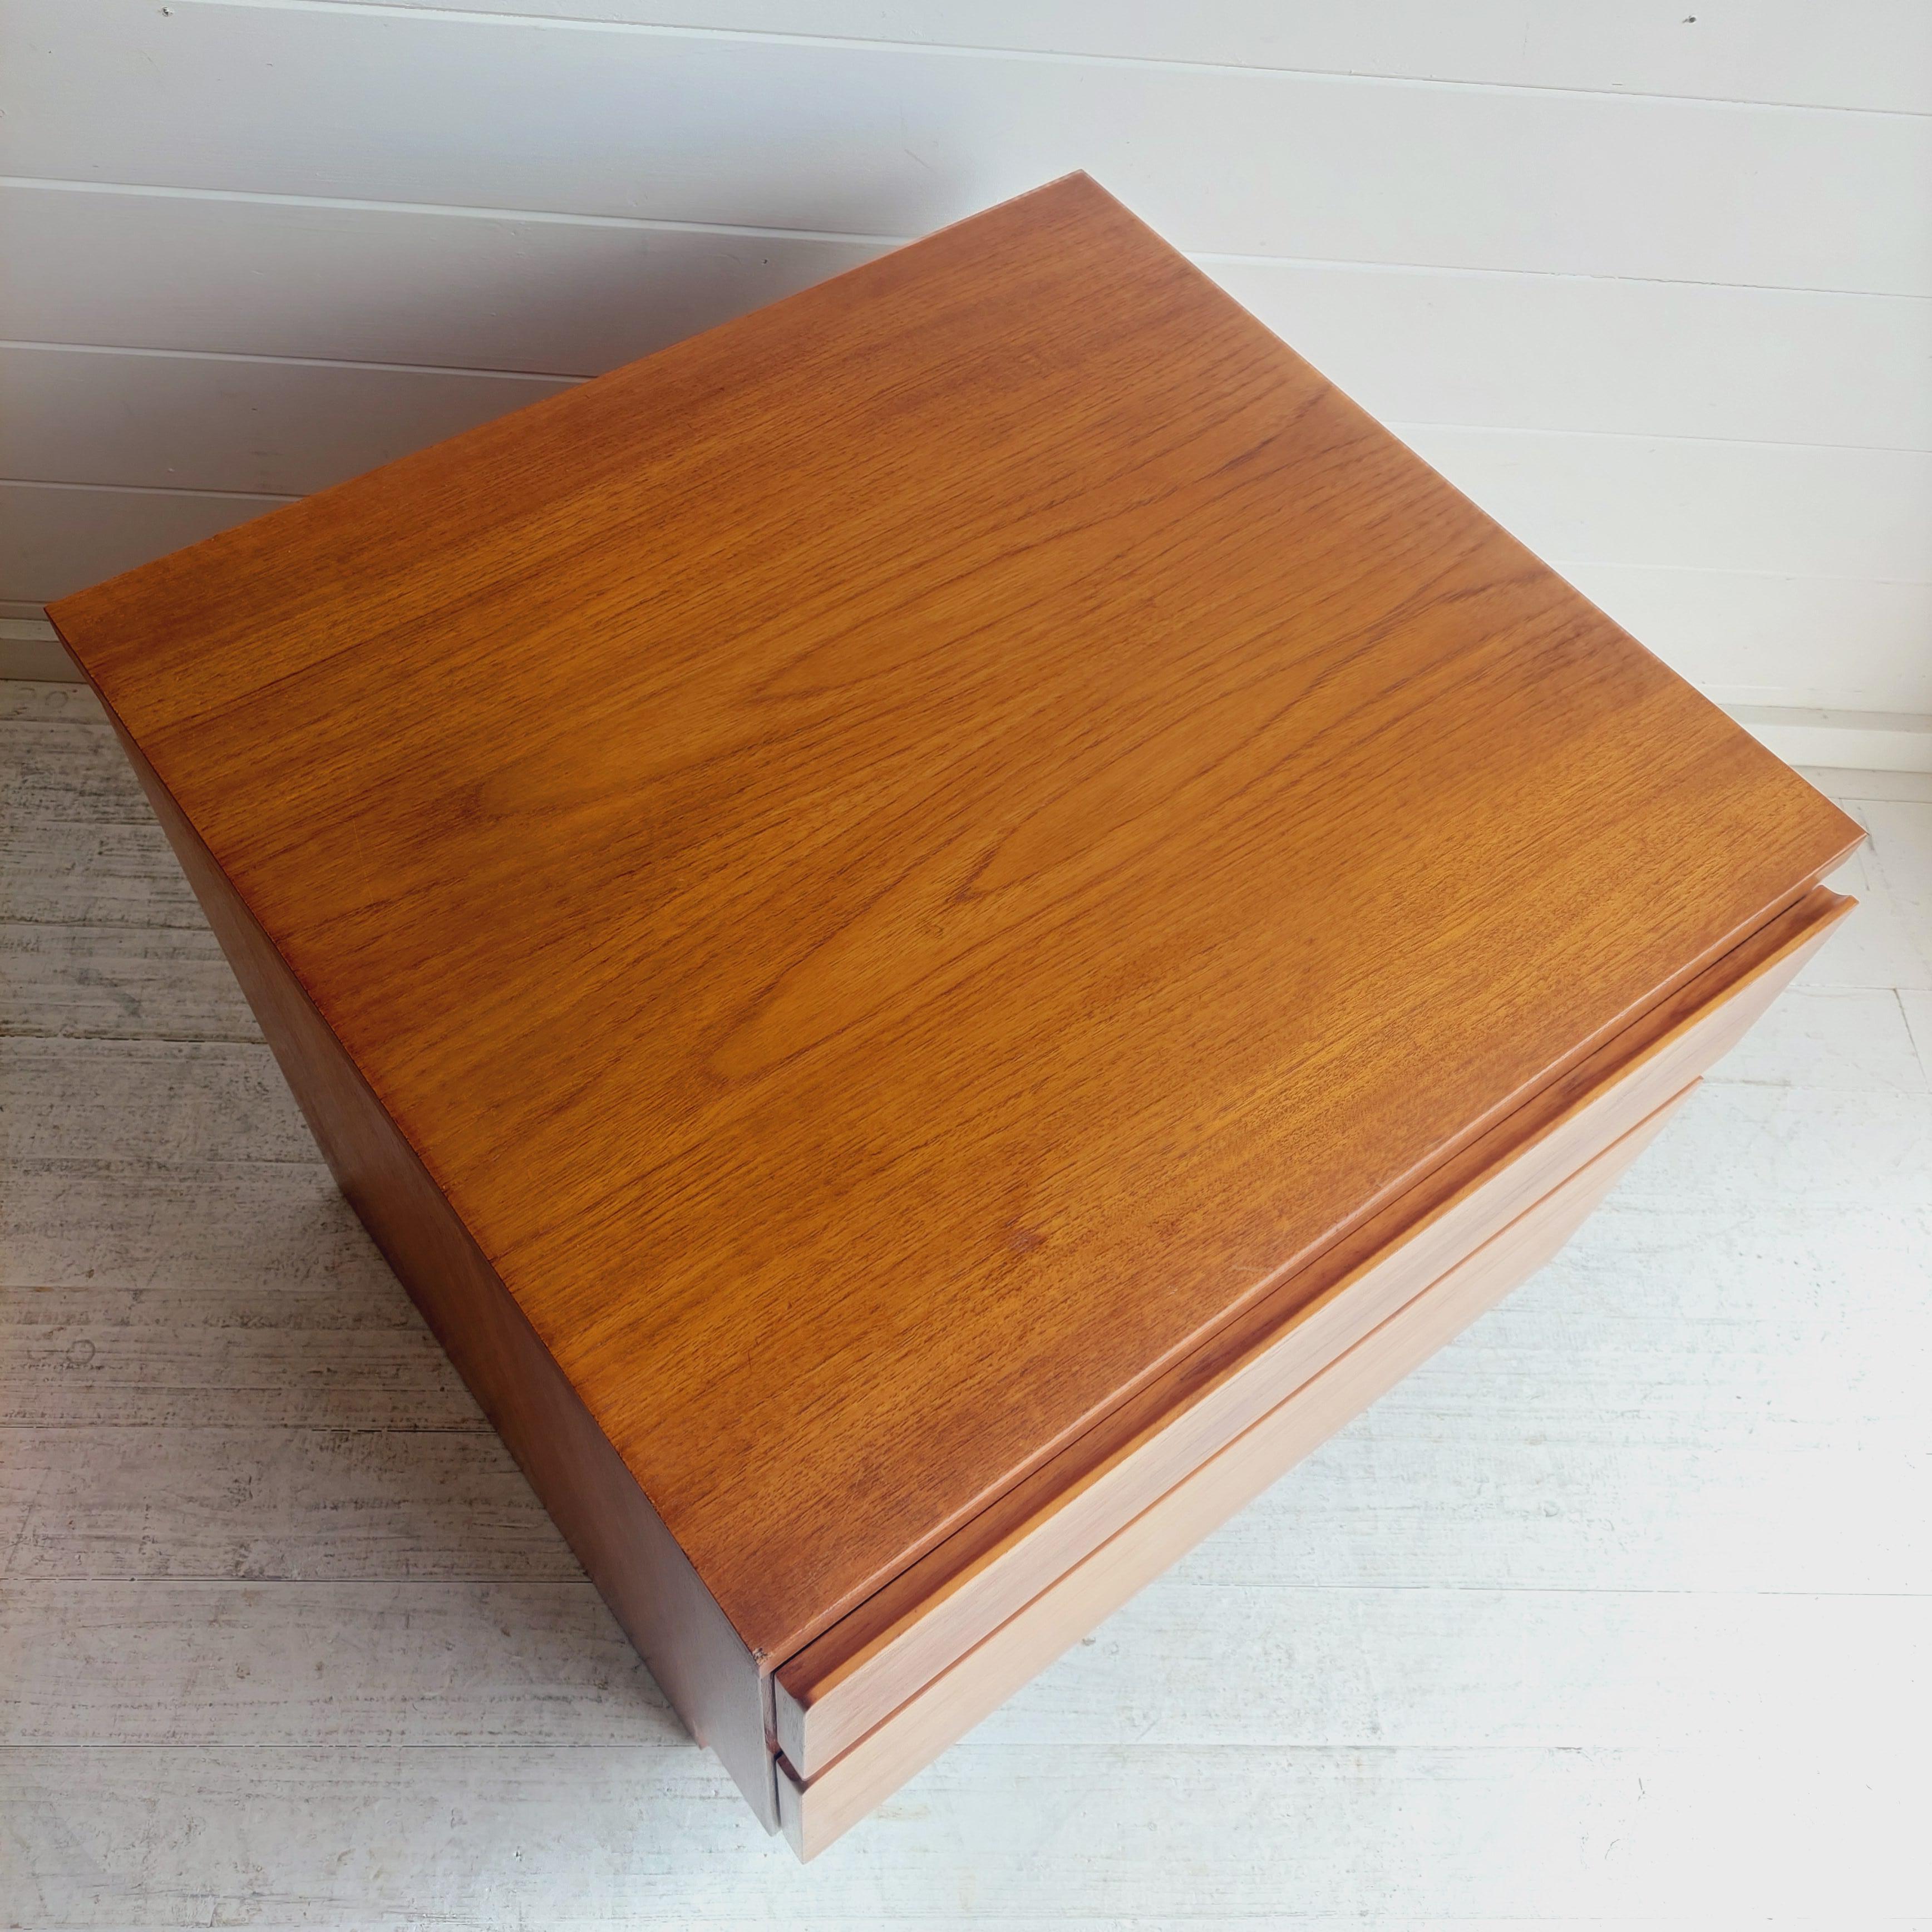 Teak Mid century teak chest of drawers bedside table by Beaver & Tapley, 1970s